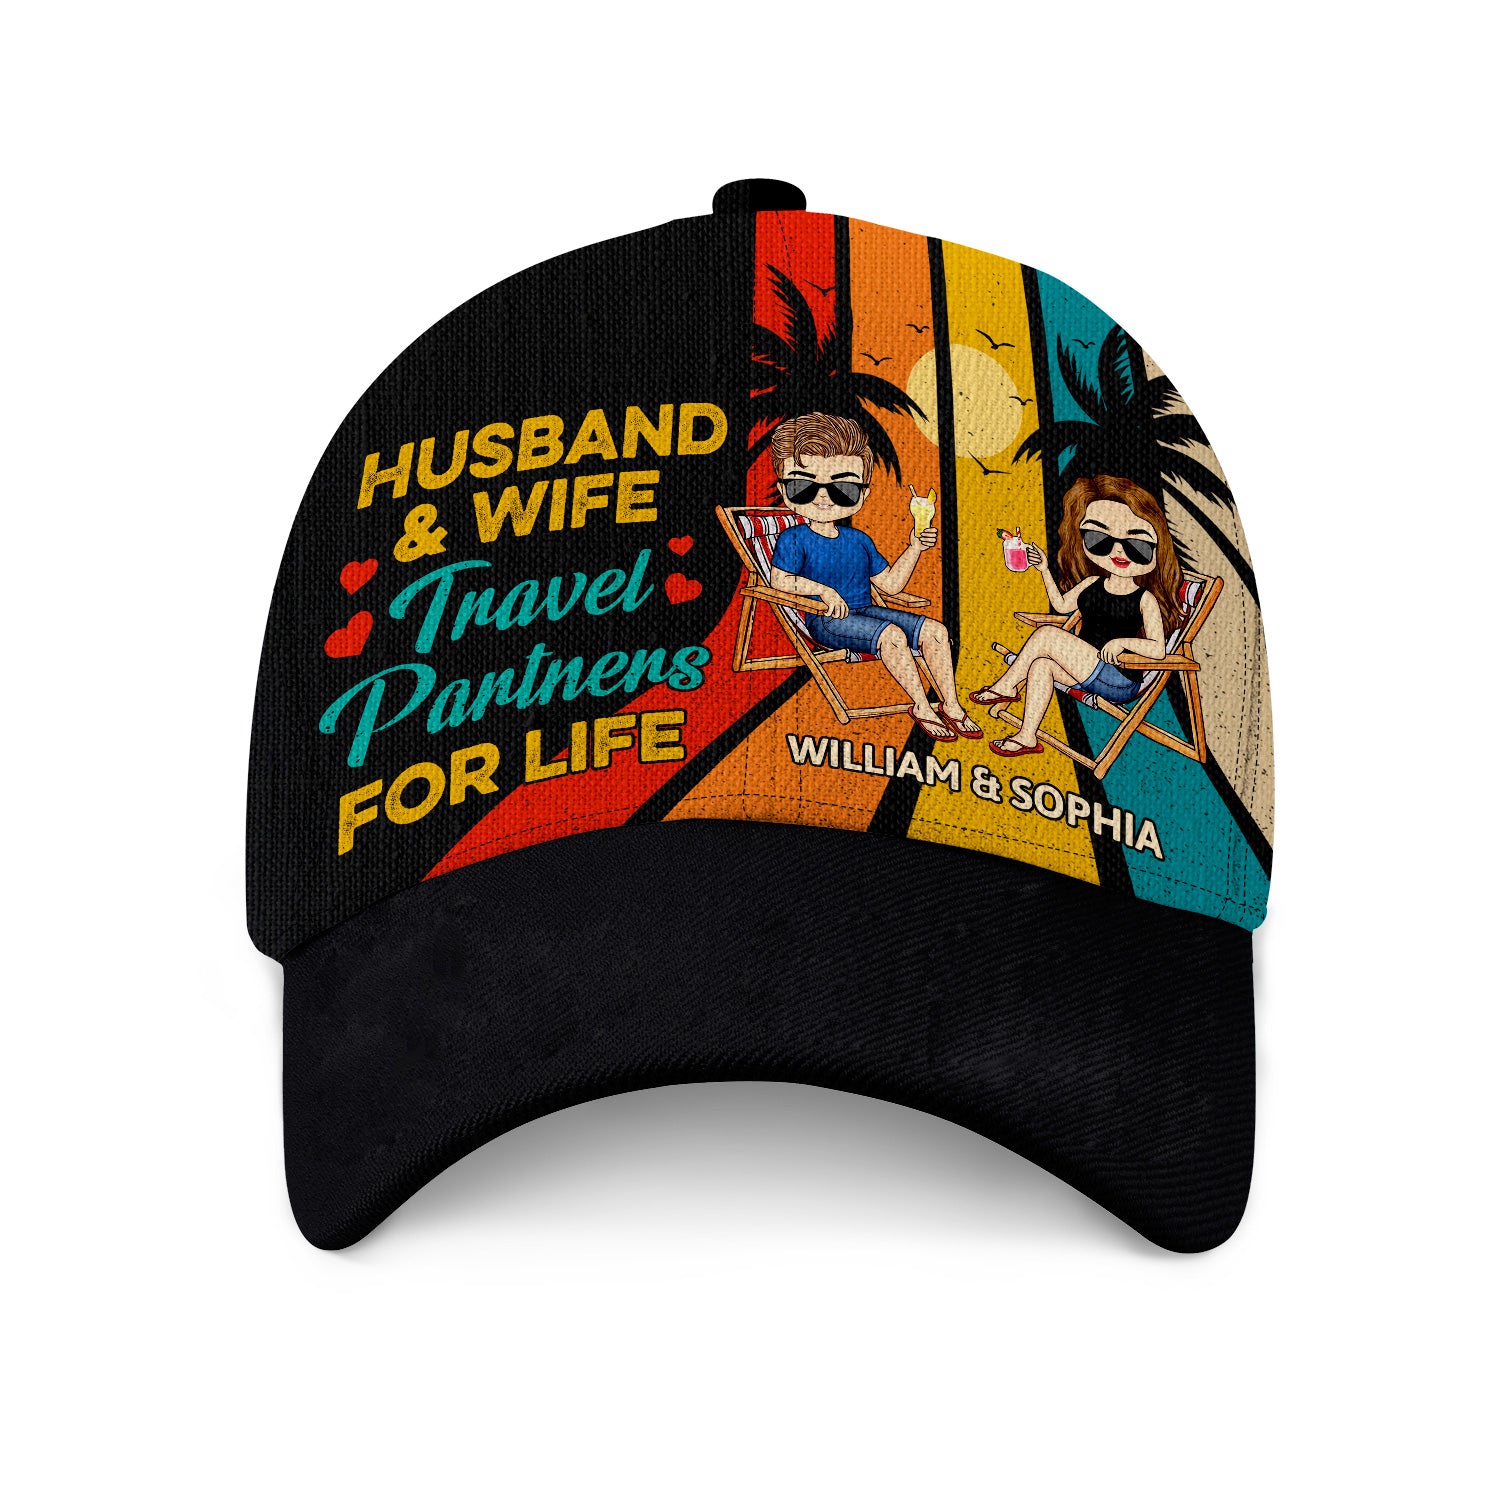 Travel Partners For Life - Gift For Traveling Lovers, Couples, Husband, Wife - Personalized Classic Cap